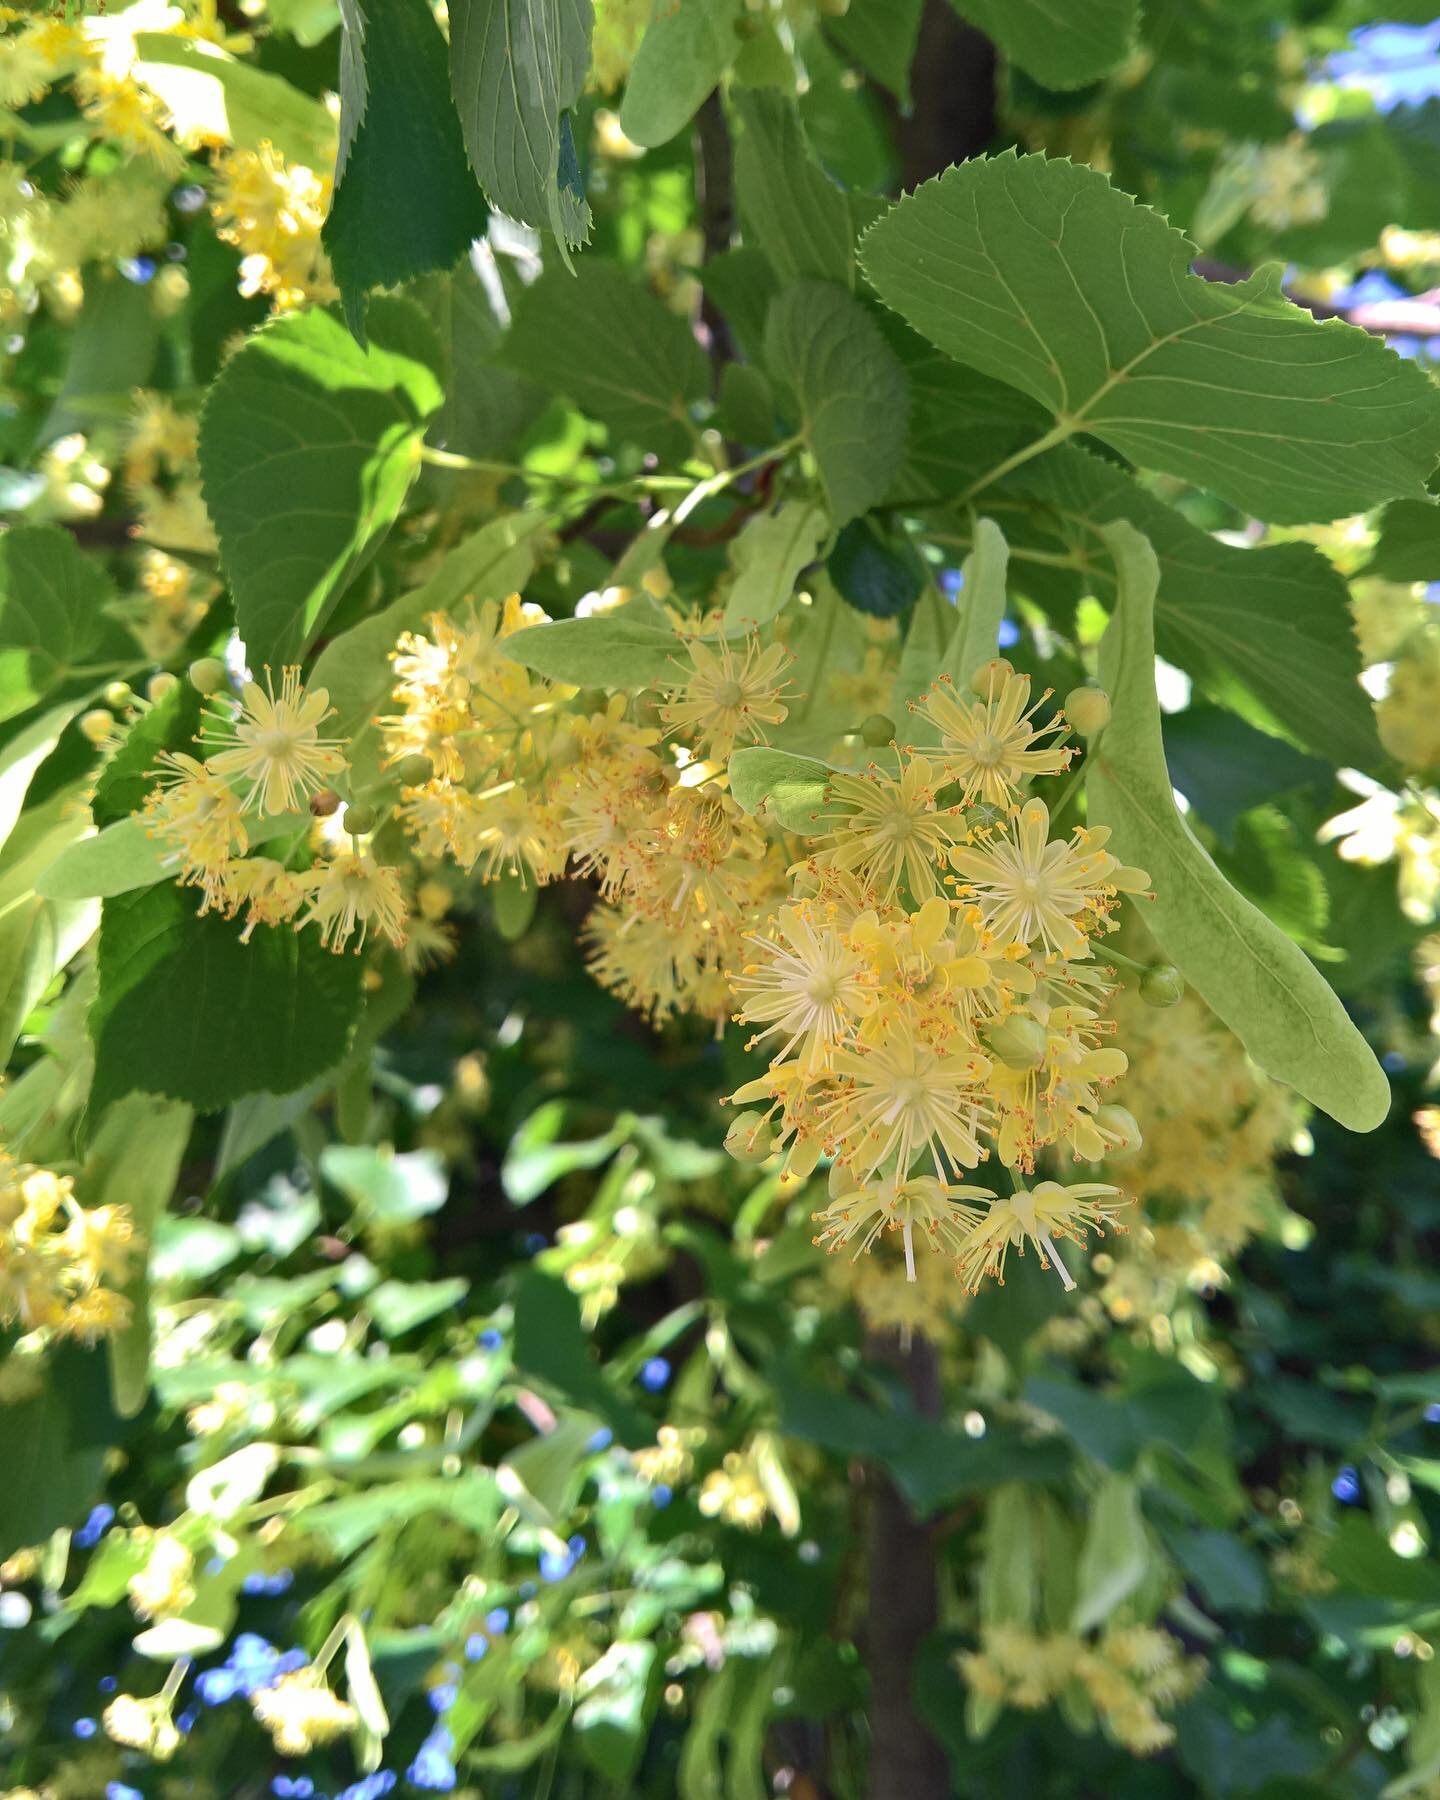 🌼 Lime 🍋 doesn&rsquo;t come from the tree that produces the limes we eat, but from the Tilia genus. In the U.K. we have two native species, the small leaved lime (Tilia cordata) and the large leaved lime (Tilia platyphyllos). These two hybridise ea